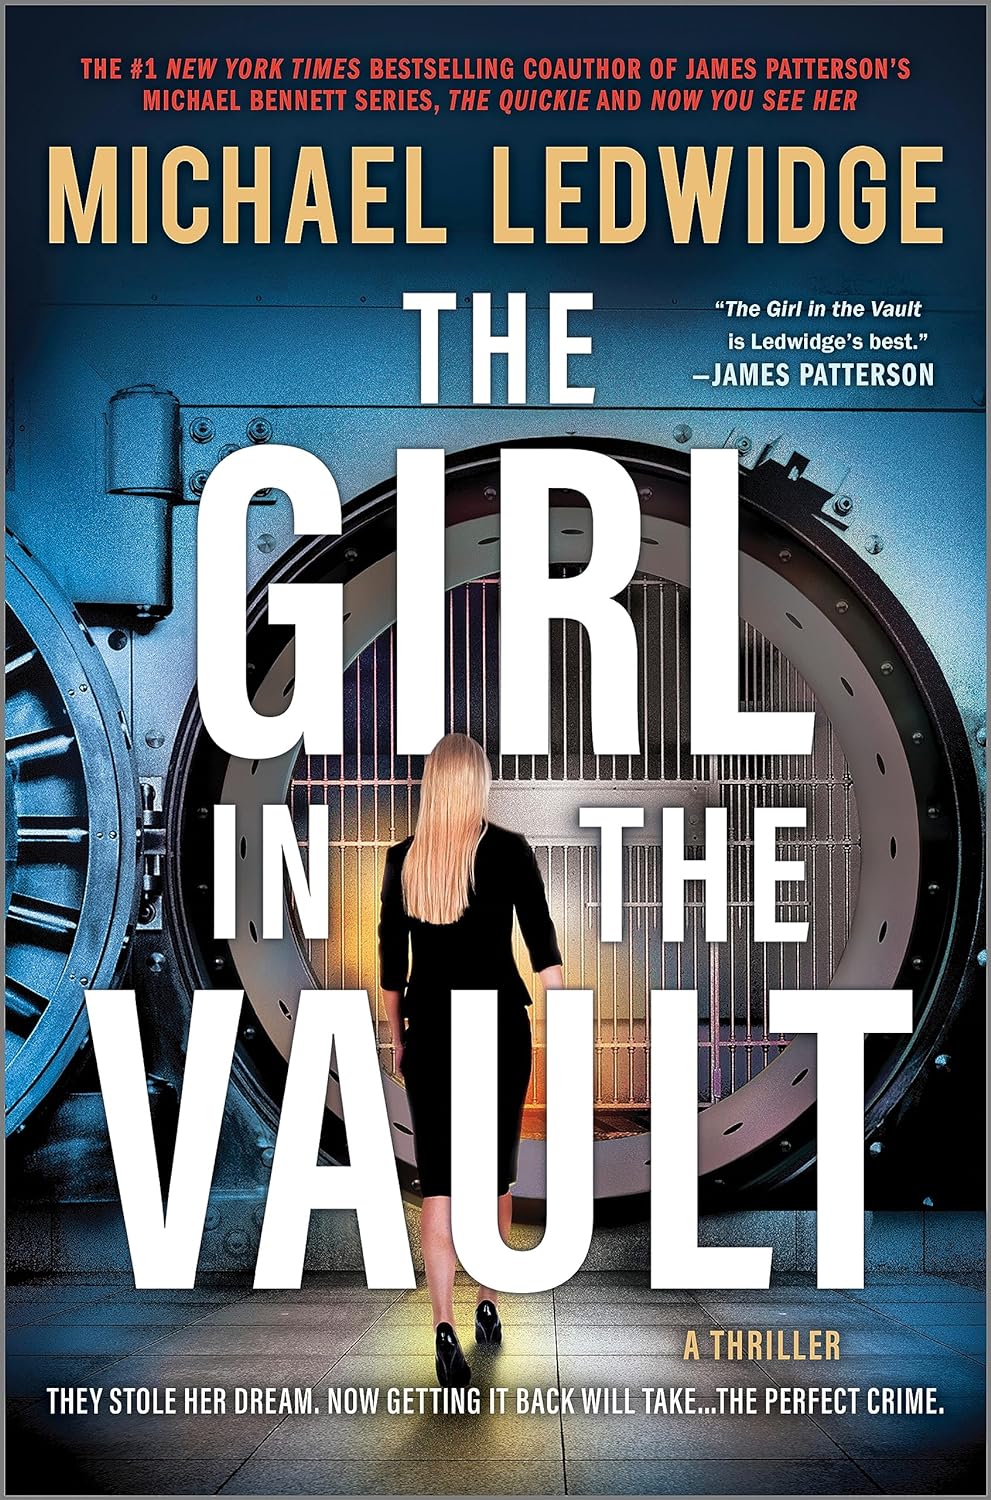 Image for "The Girl in the Vault"